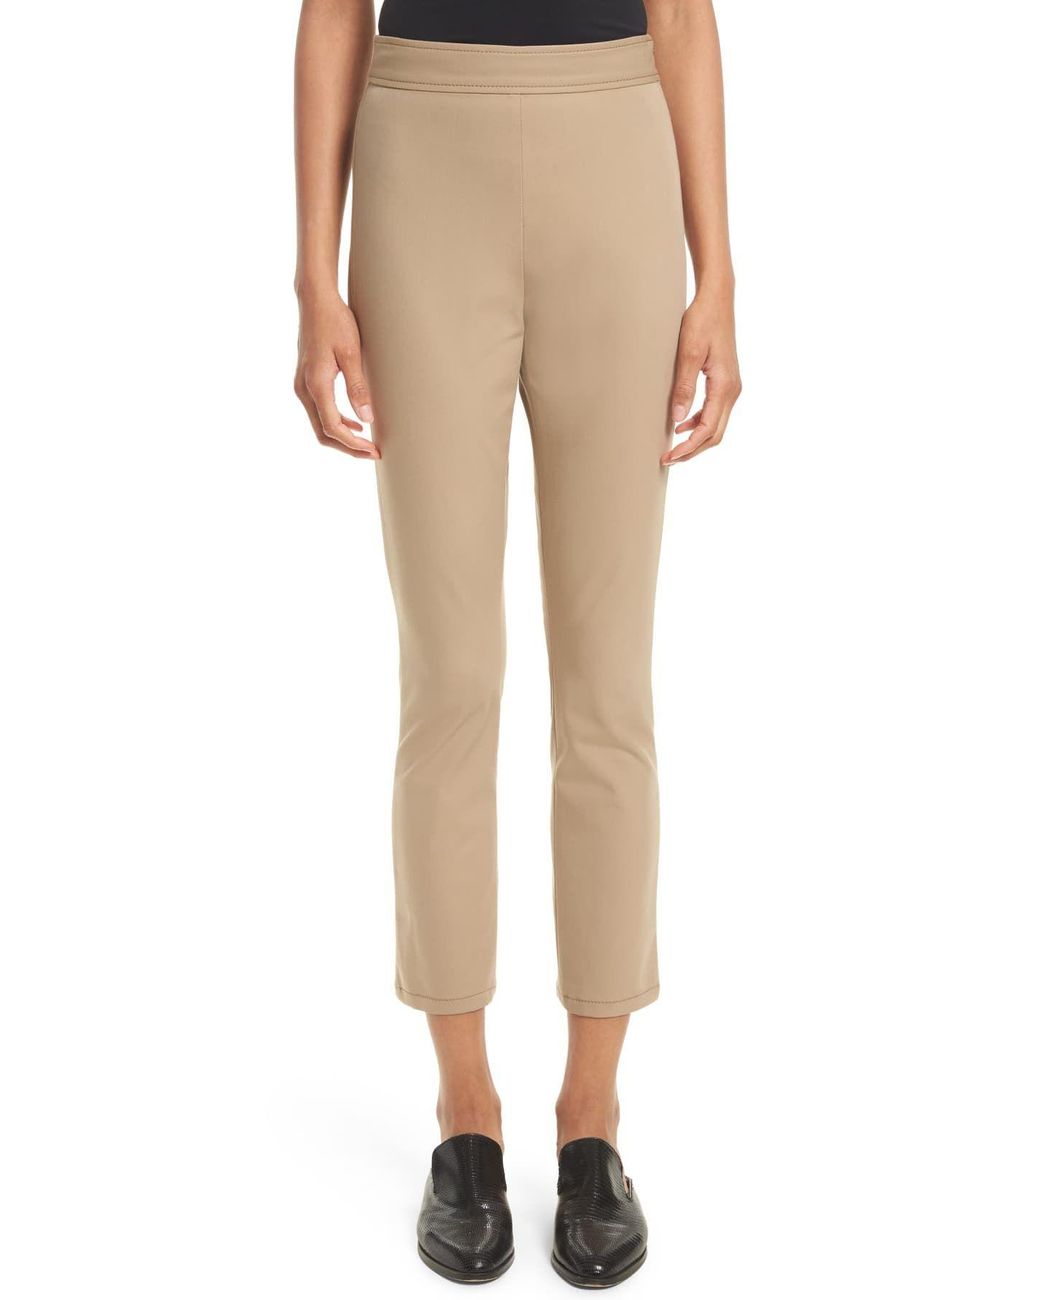 Theory Thaniel Approach Stretch Cropped Pants